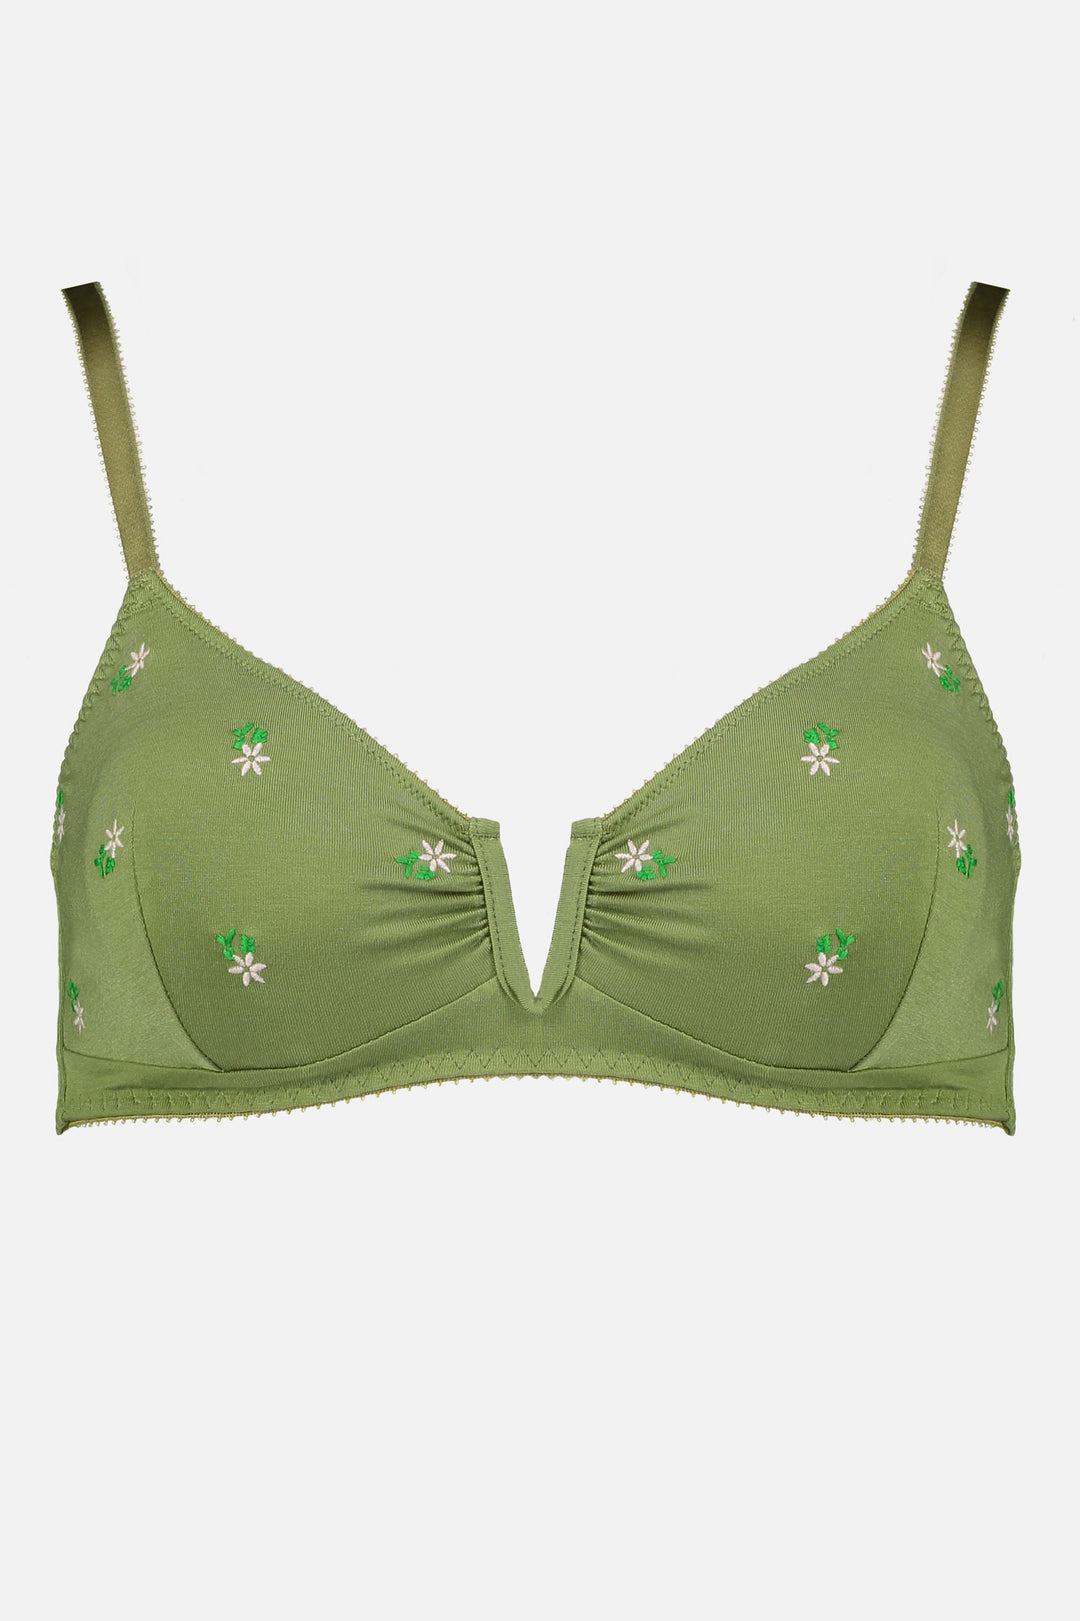 Videris Lingerie Angela wire free soft cup bra in olive embroidered TENCEL™ features a triangle shaped cup and front U wire